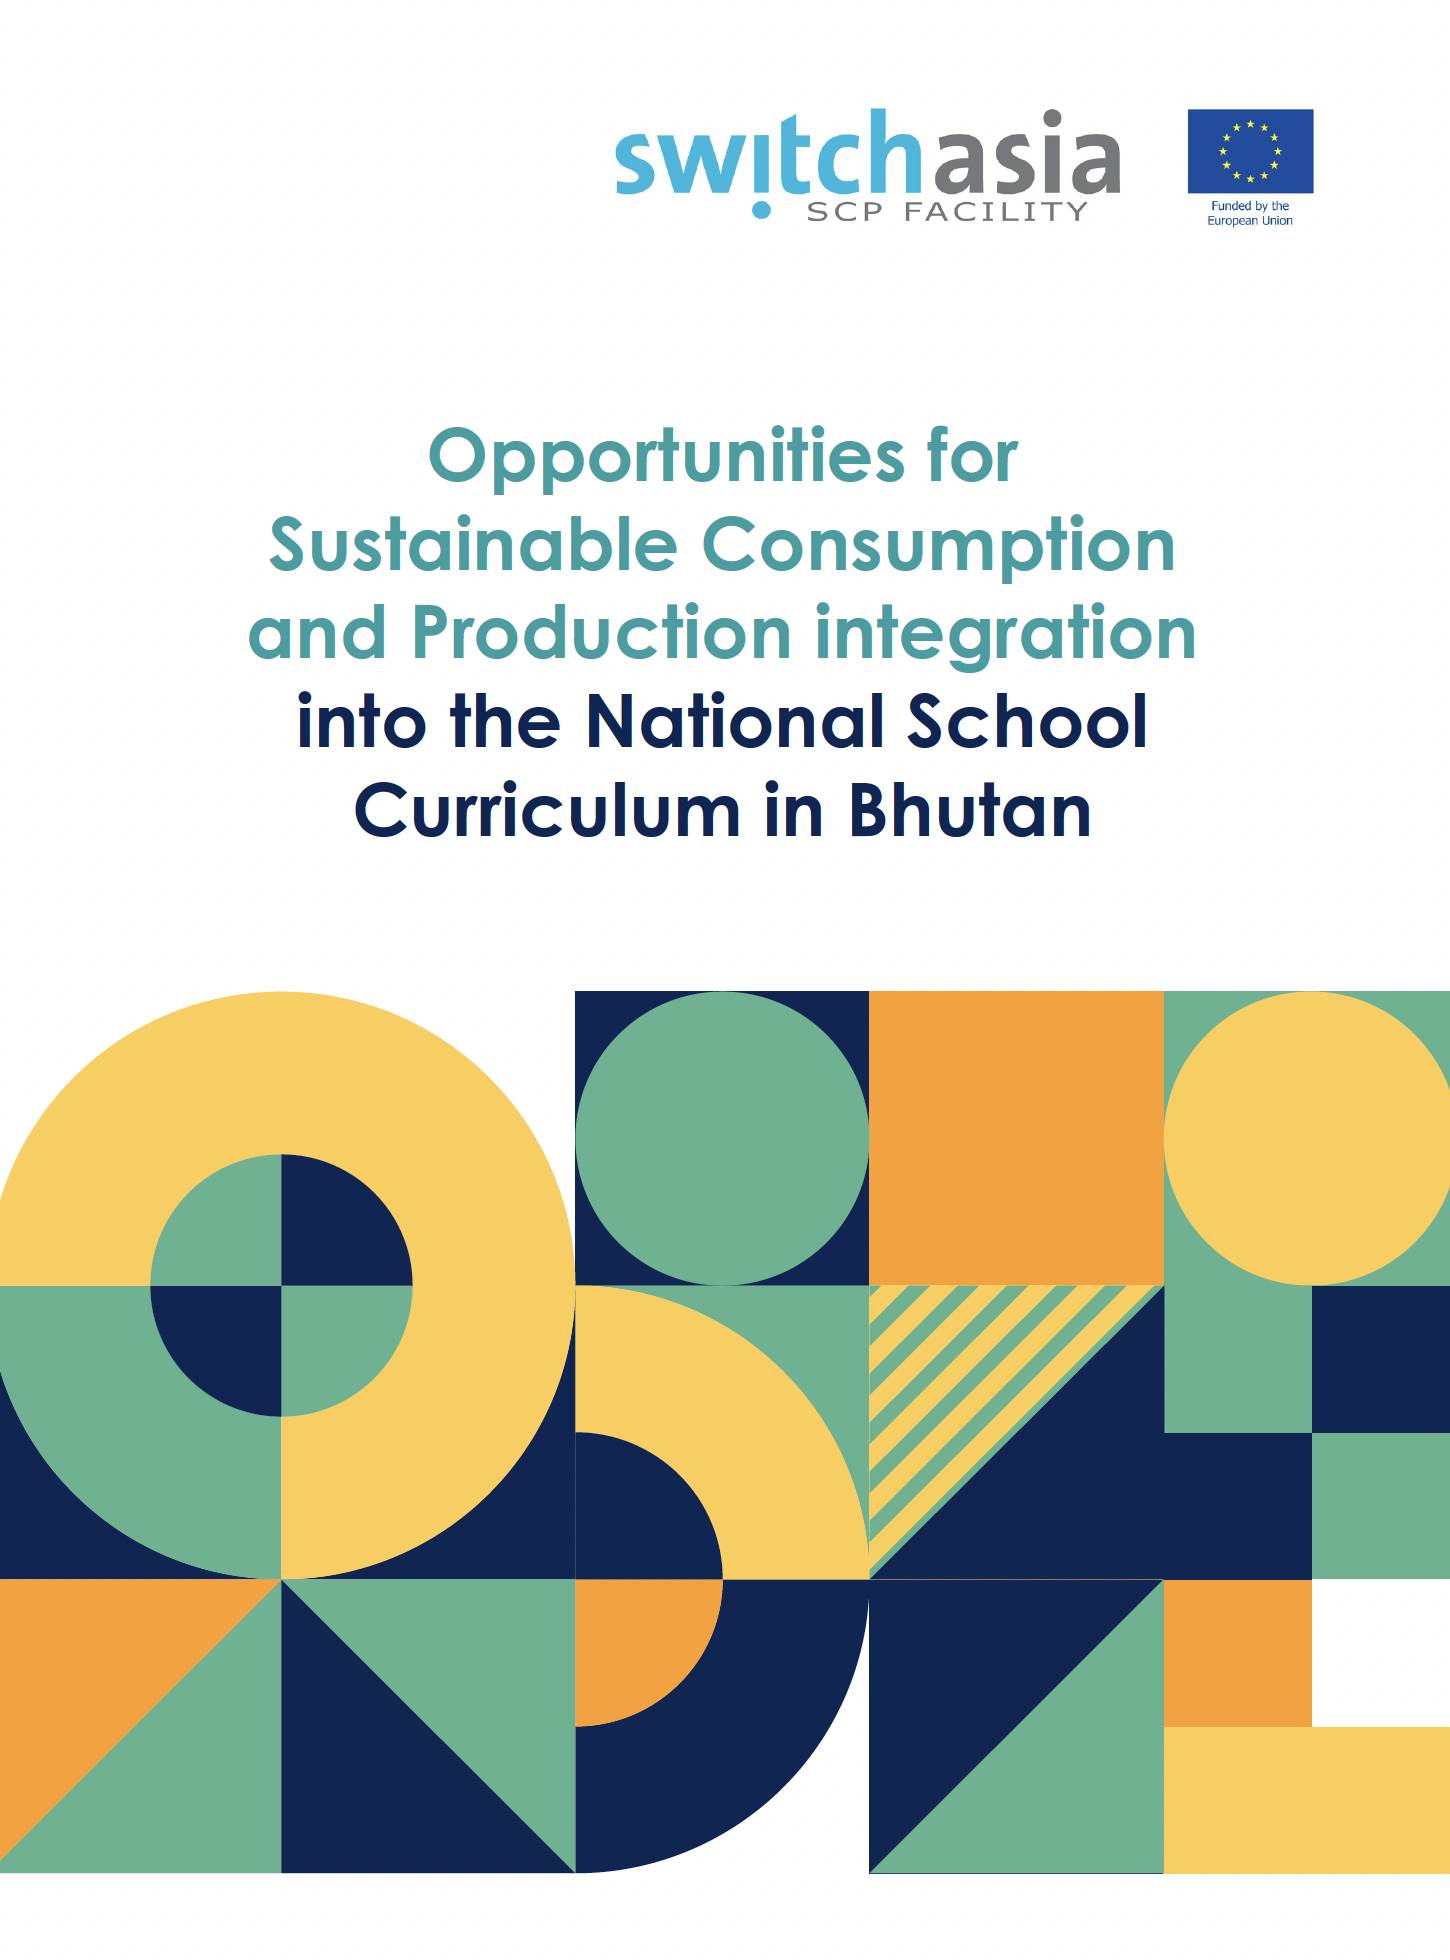 Opportunities for Sustainable Consumption and Production integration into the National School Curriculum in Bhutan